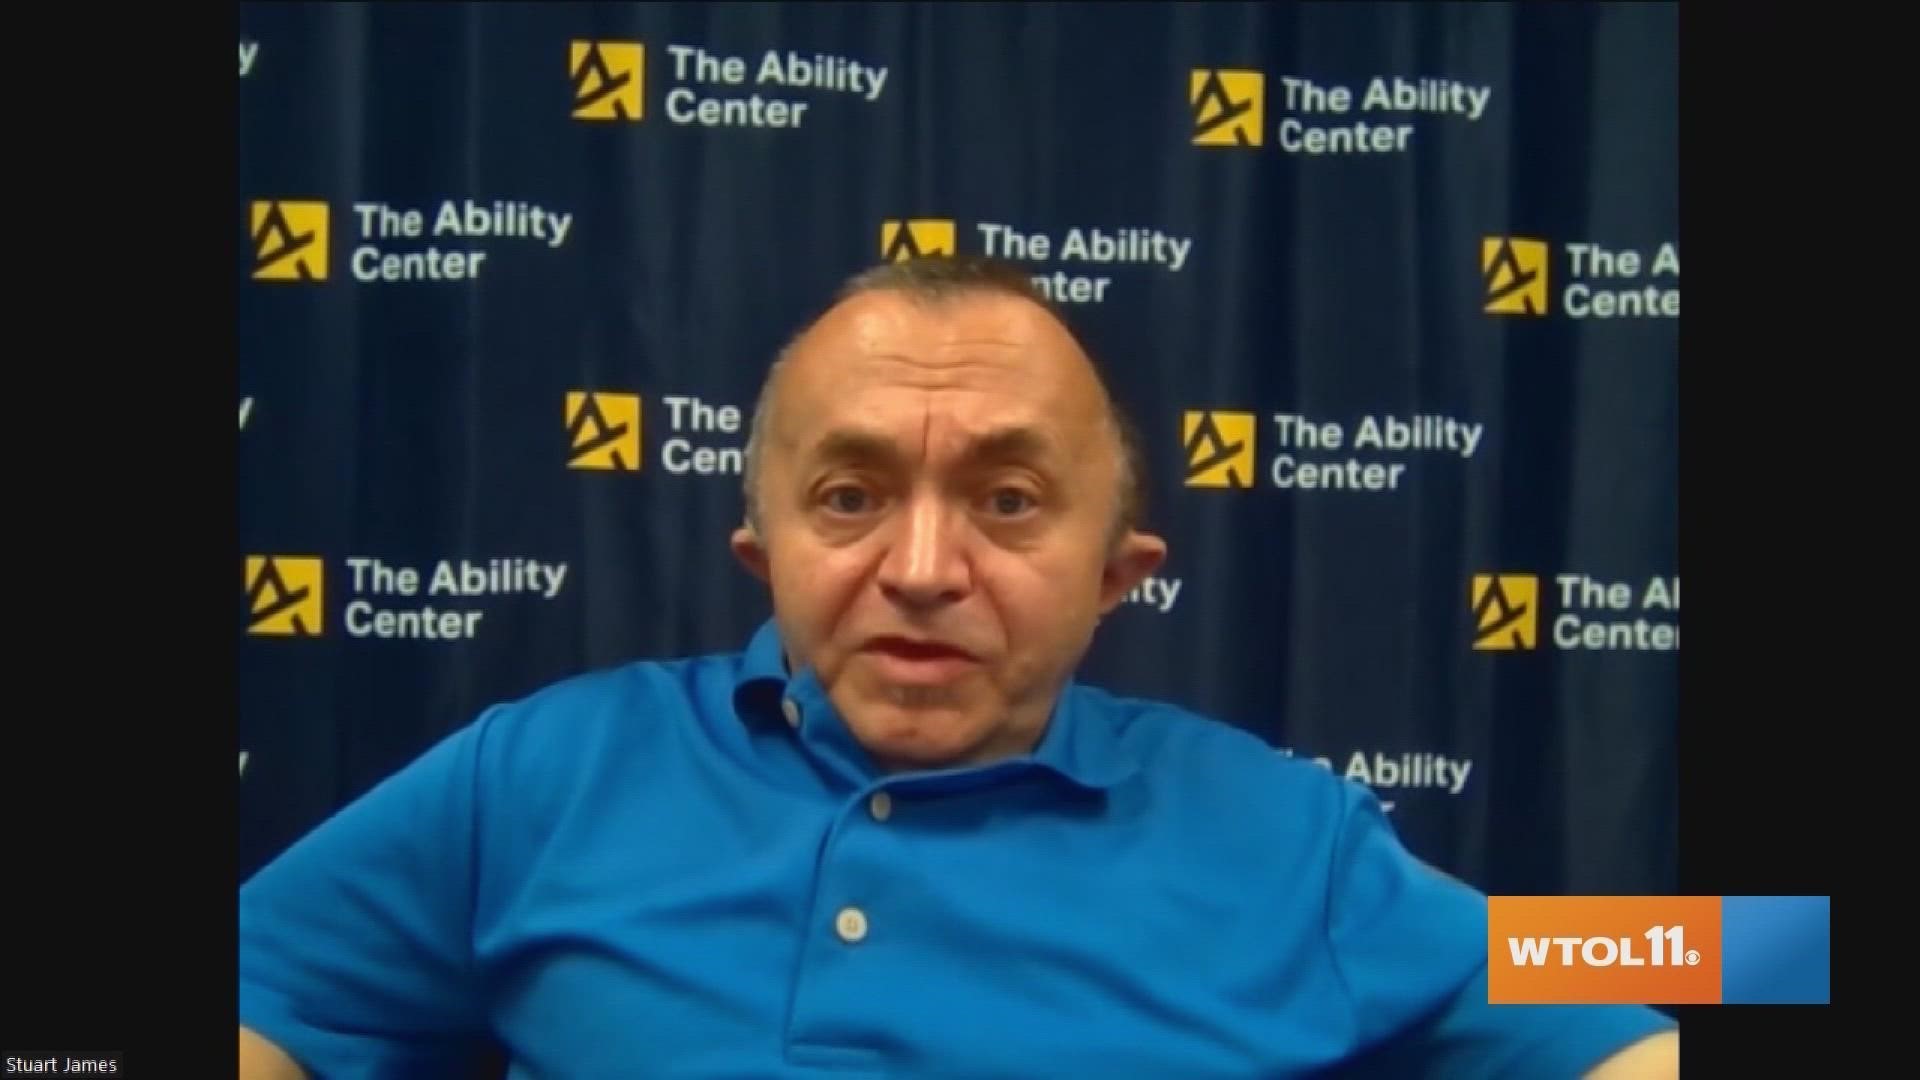 Executive Director of the Ability Center of Greater Toledo, Stuart James is passionate about changing the ways people look at disabilities.